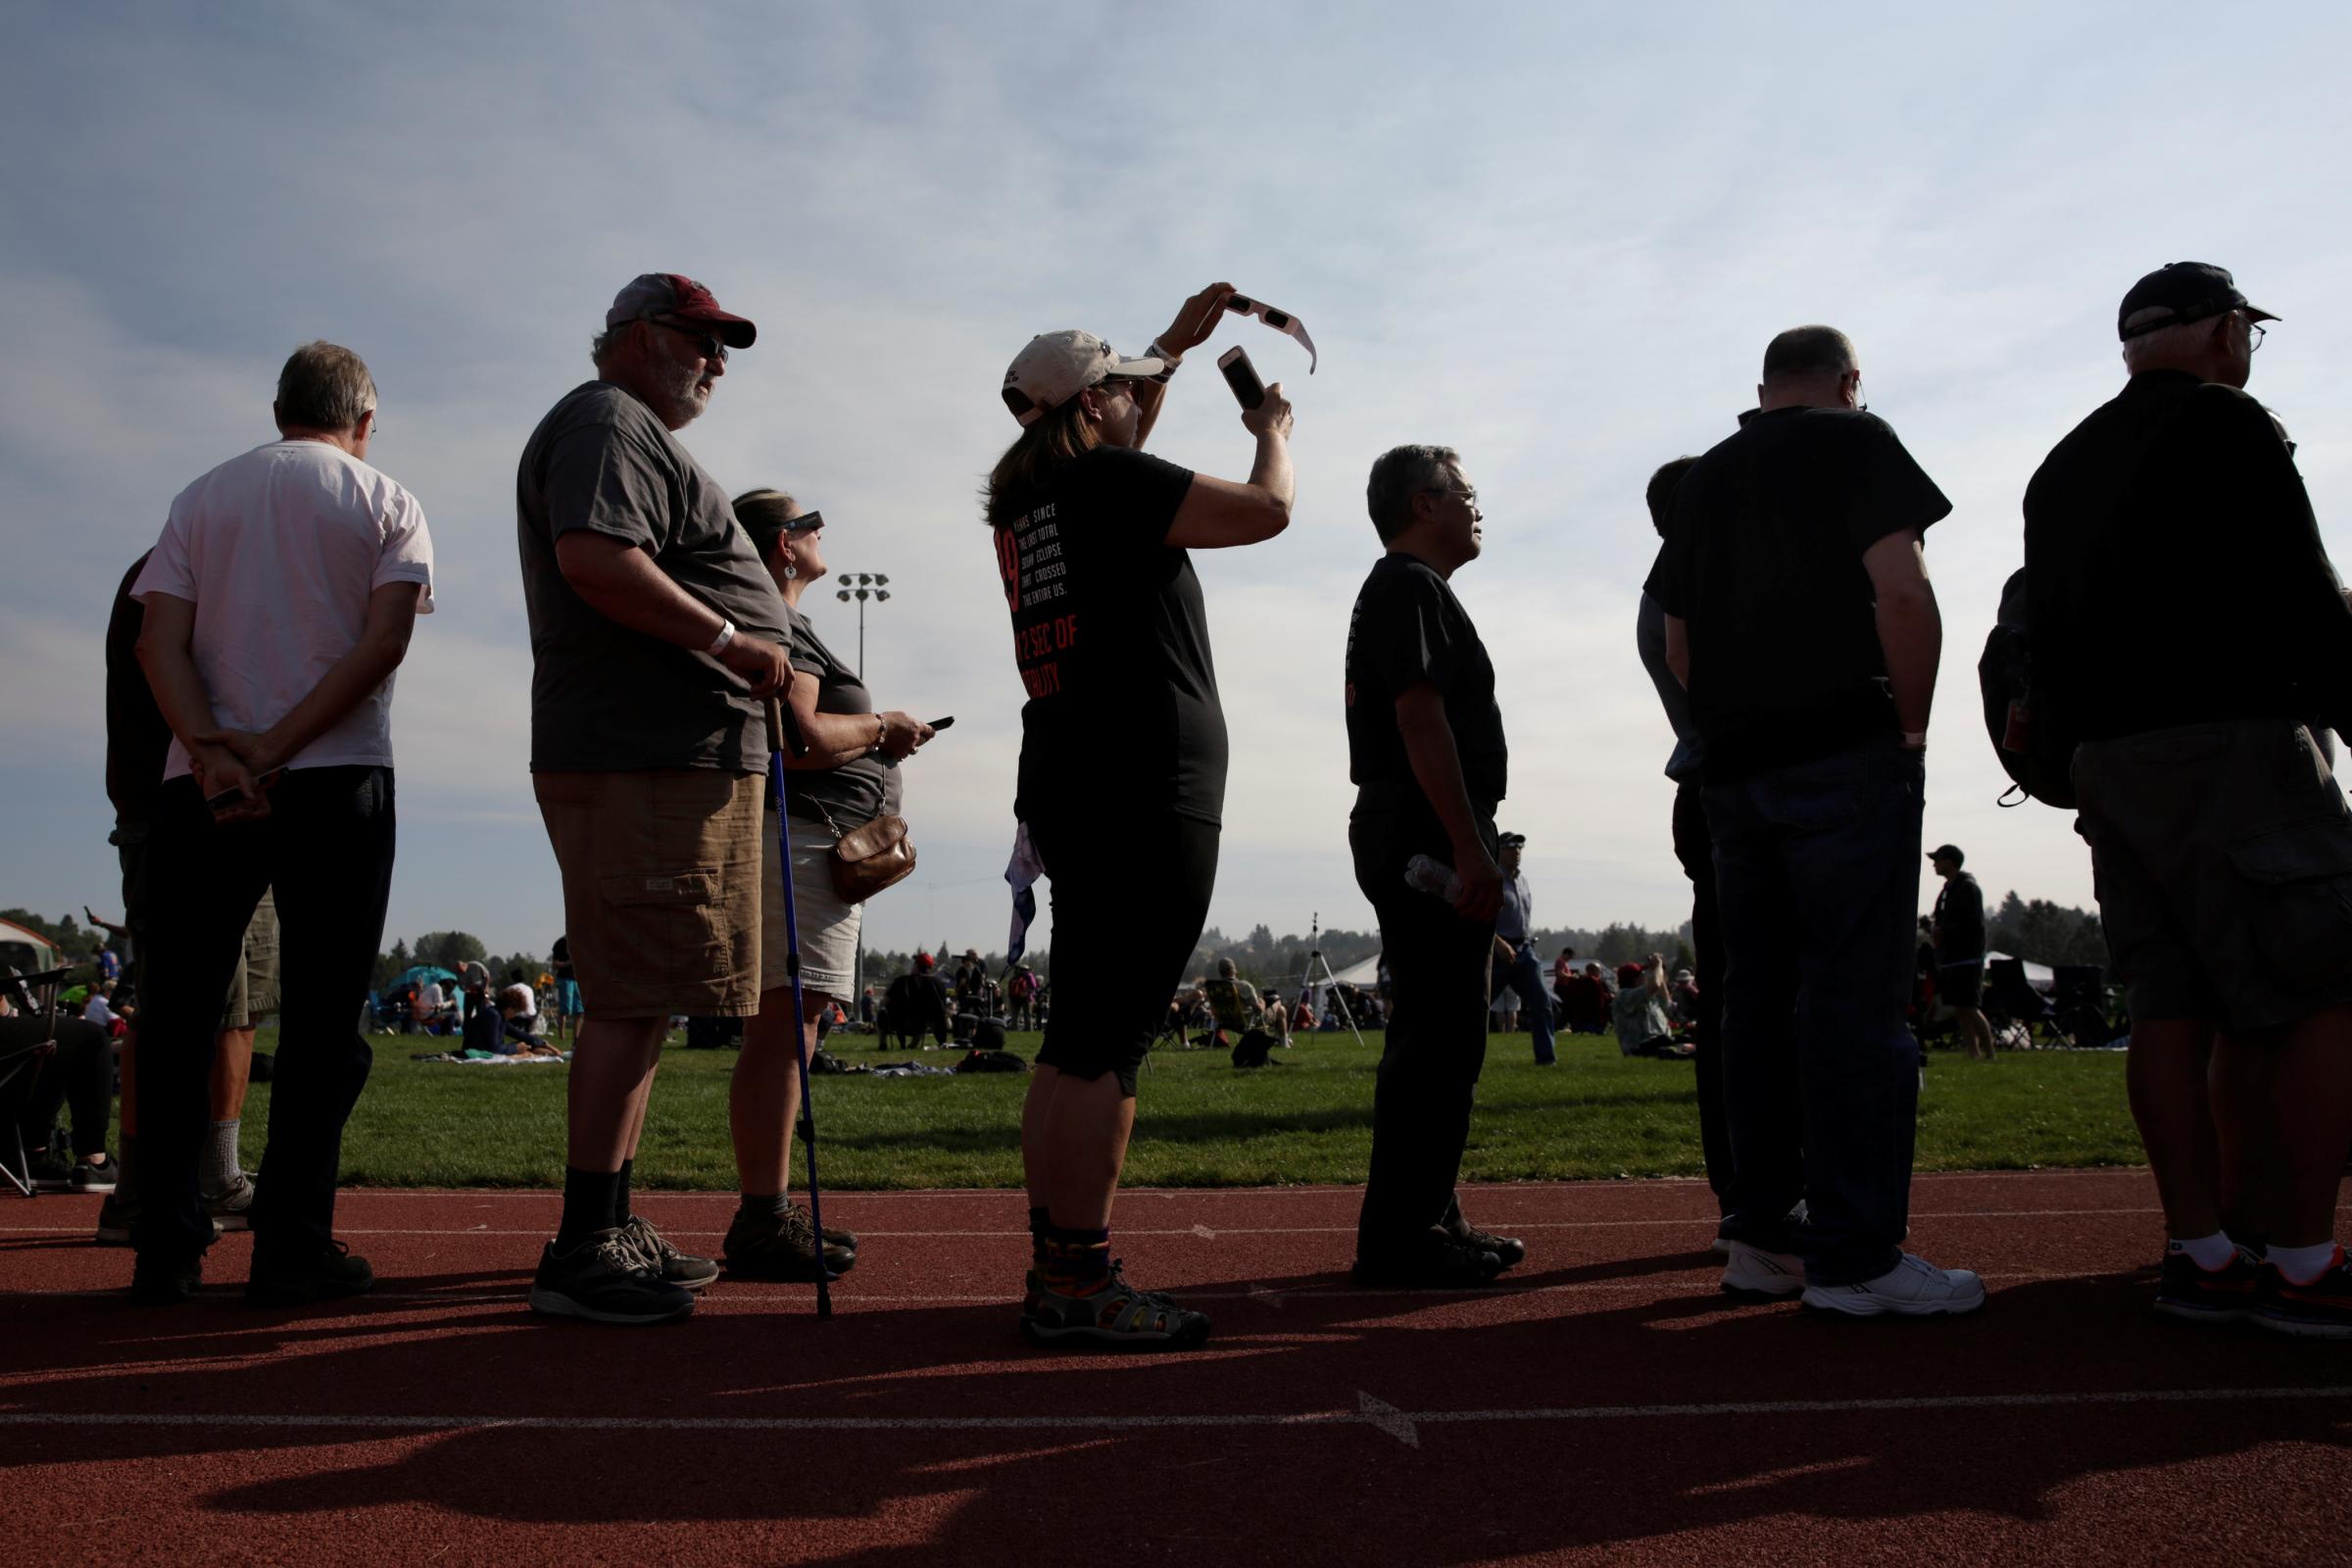 People watch the solar eclipse during the Lowell Observatory Solar Eclipse Experience at Madras High School in Madras, Oregon